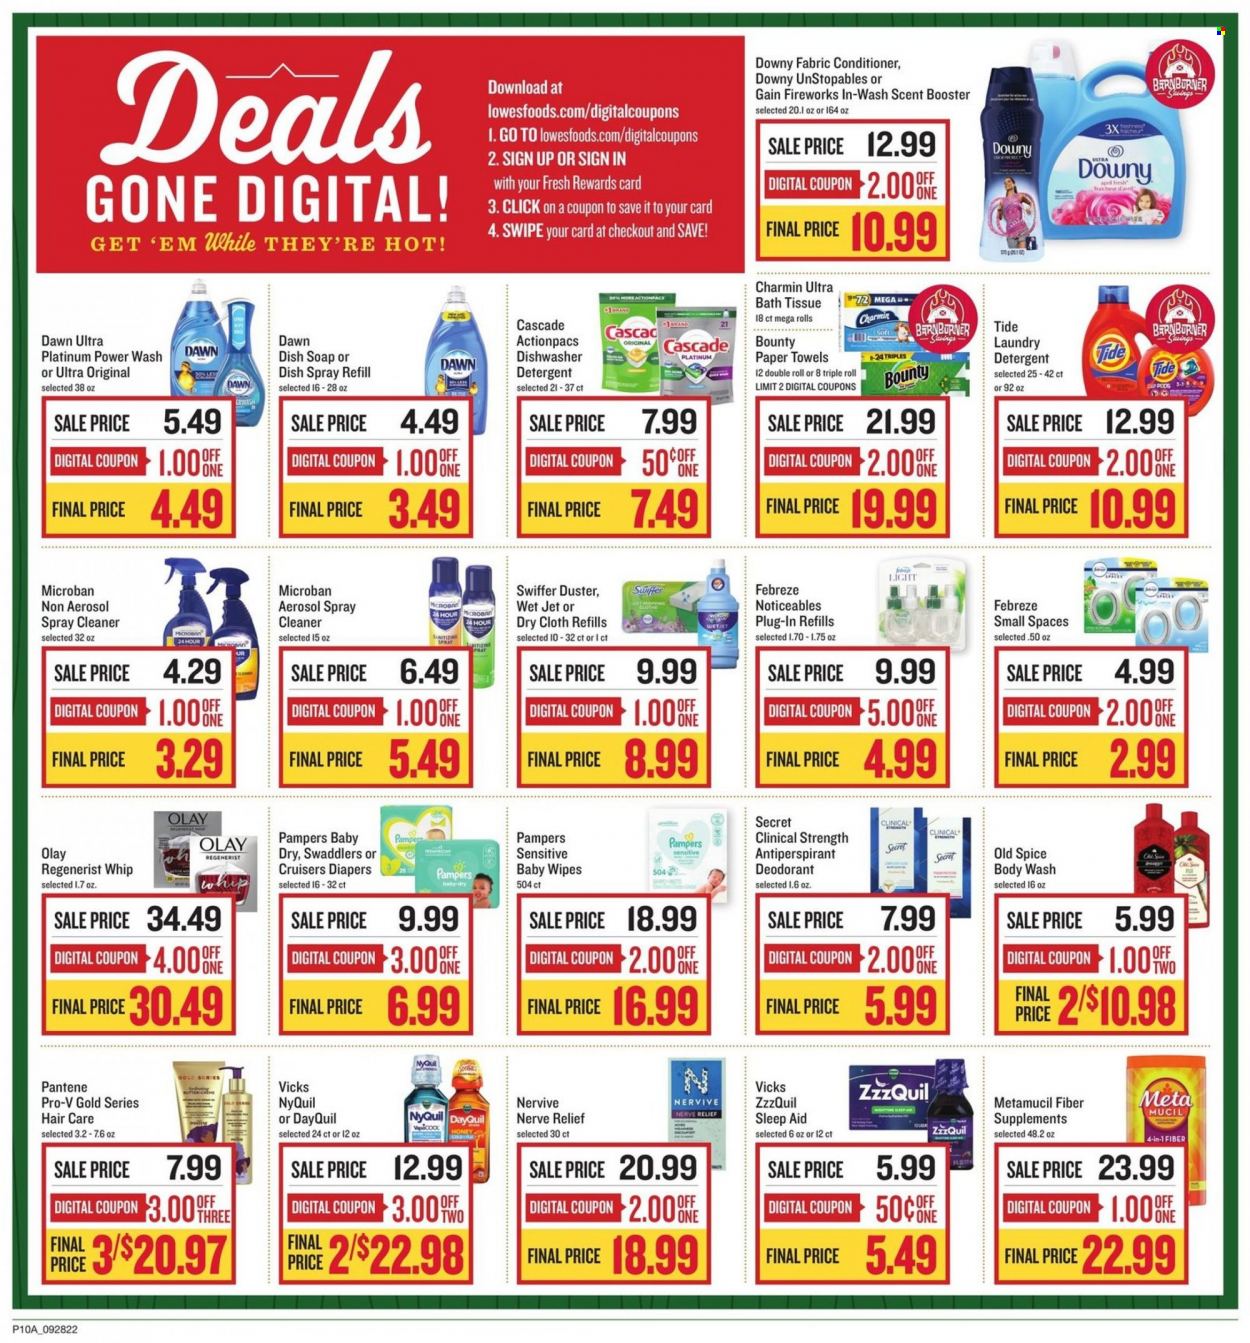 thumbnail - Lowes Foods Flyer - 09/28/2022 - 10/04/2022 - Sales products - Bounty, spice, honey, wipes, Pampers, baby wipes, nappies, bath tissue, kitchen towels, paper towels, Charmin, detergent, Febreze, Gain, cleaner, Swiffer, Cascade, Tide, Unstopables, laundry detergent, Gain Fireworks, Downy Laundry, Jet, body wash, Old Spice, soap, Olay, Pantene, anti-perspirant, deodorant, Vicks, DayQuil, ZzzQuil, NyQuil, Metamucil. Page 10.